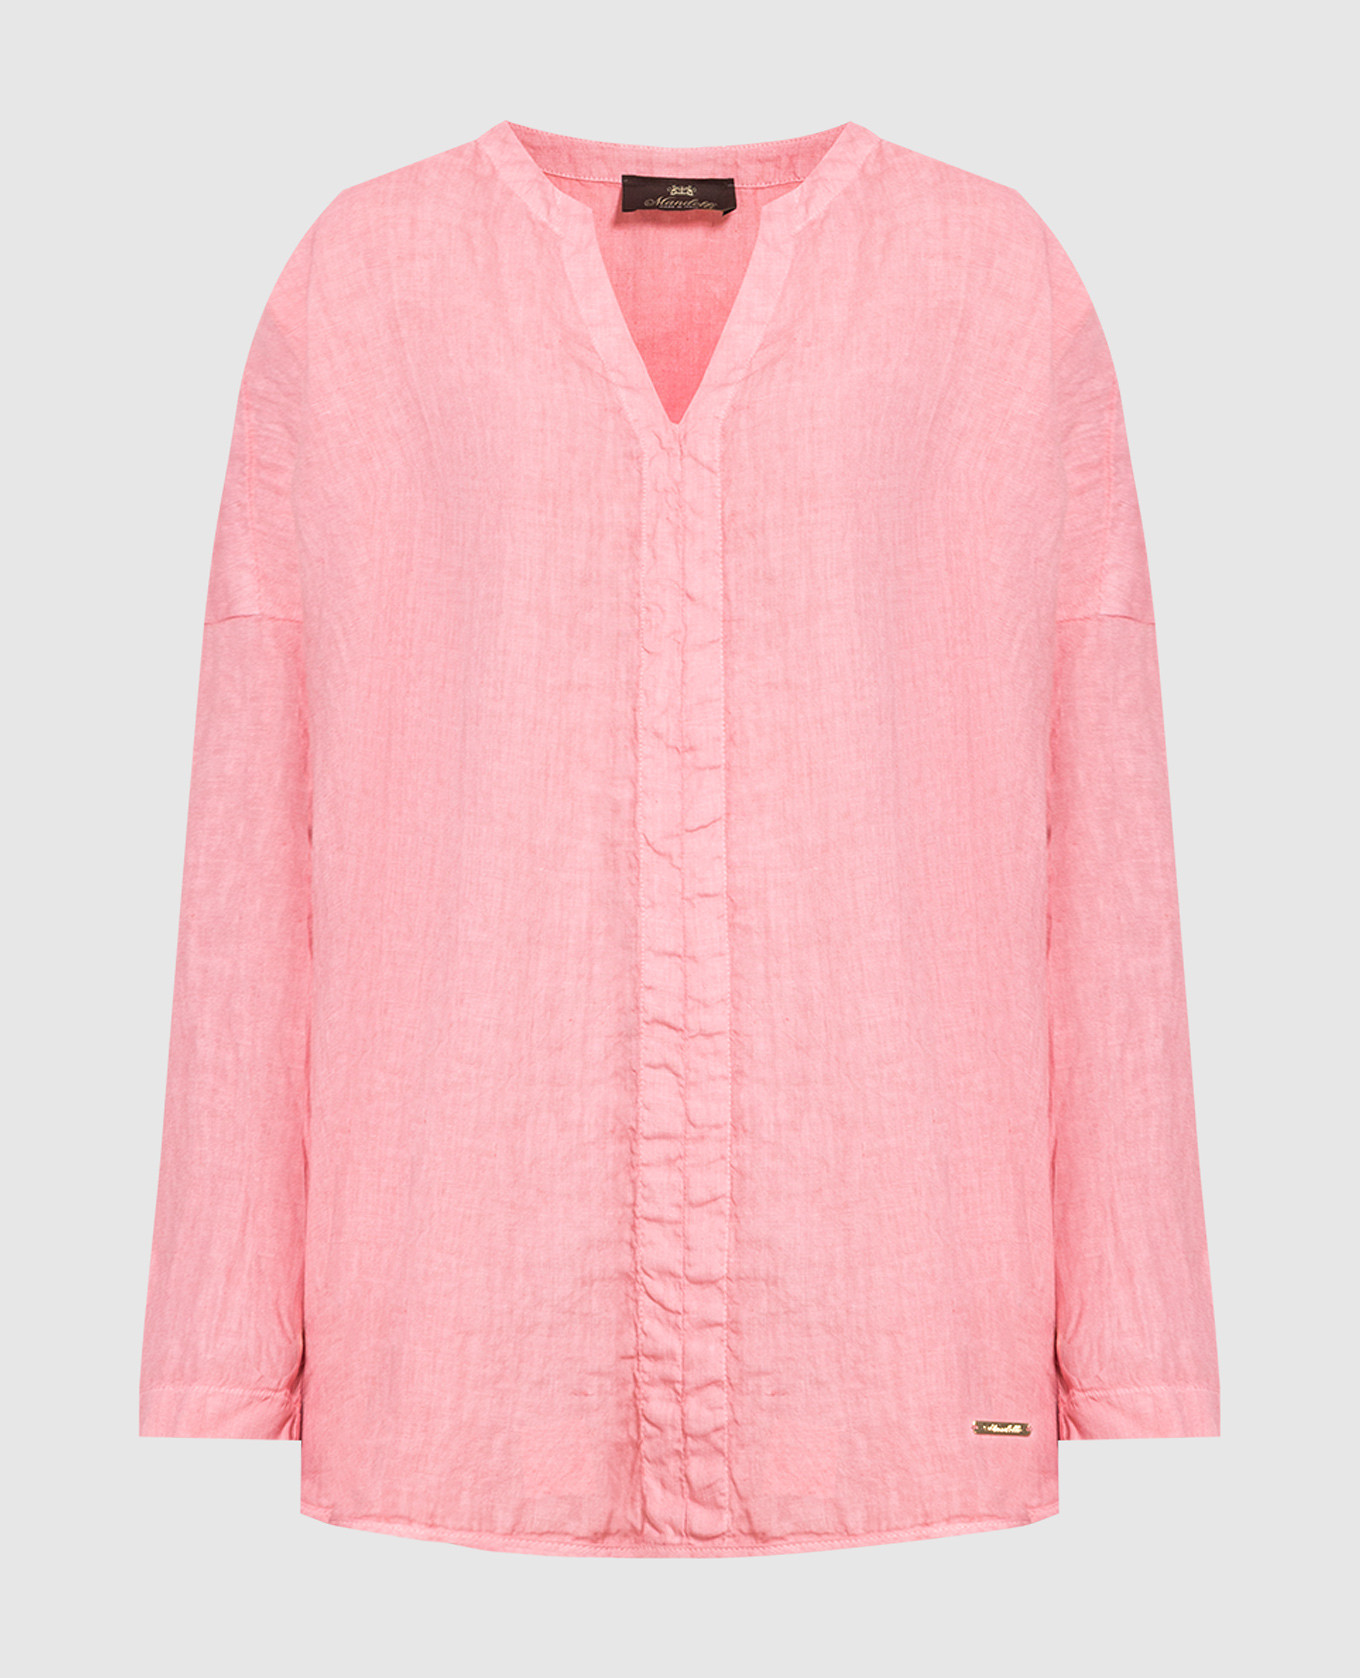 Pink linen blouse with logo